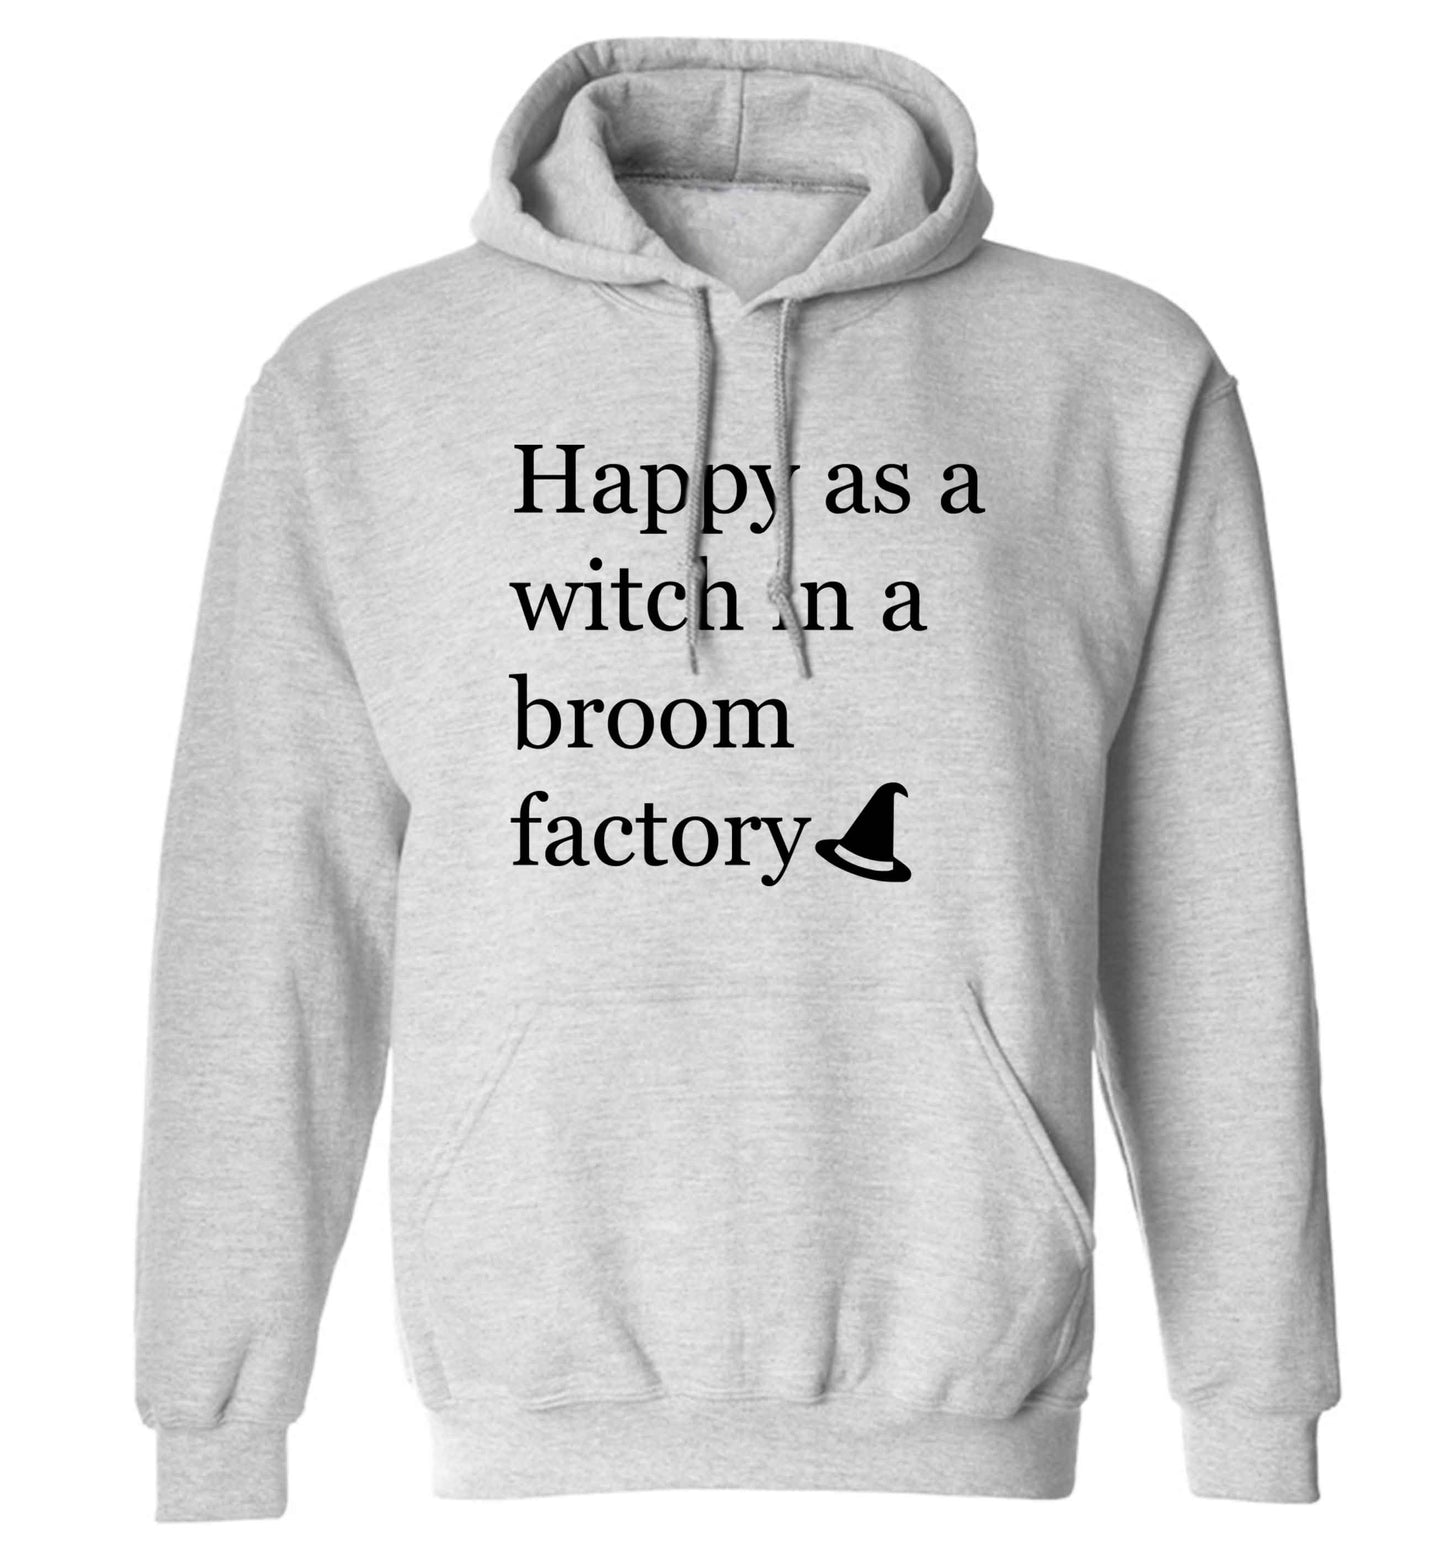 Happy as a witch in a broom factory adults unisex grey hoodie 2XL